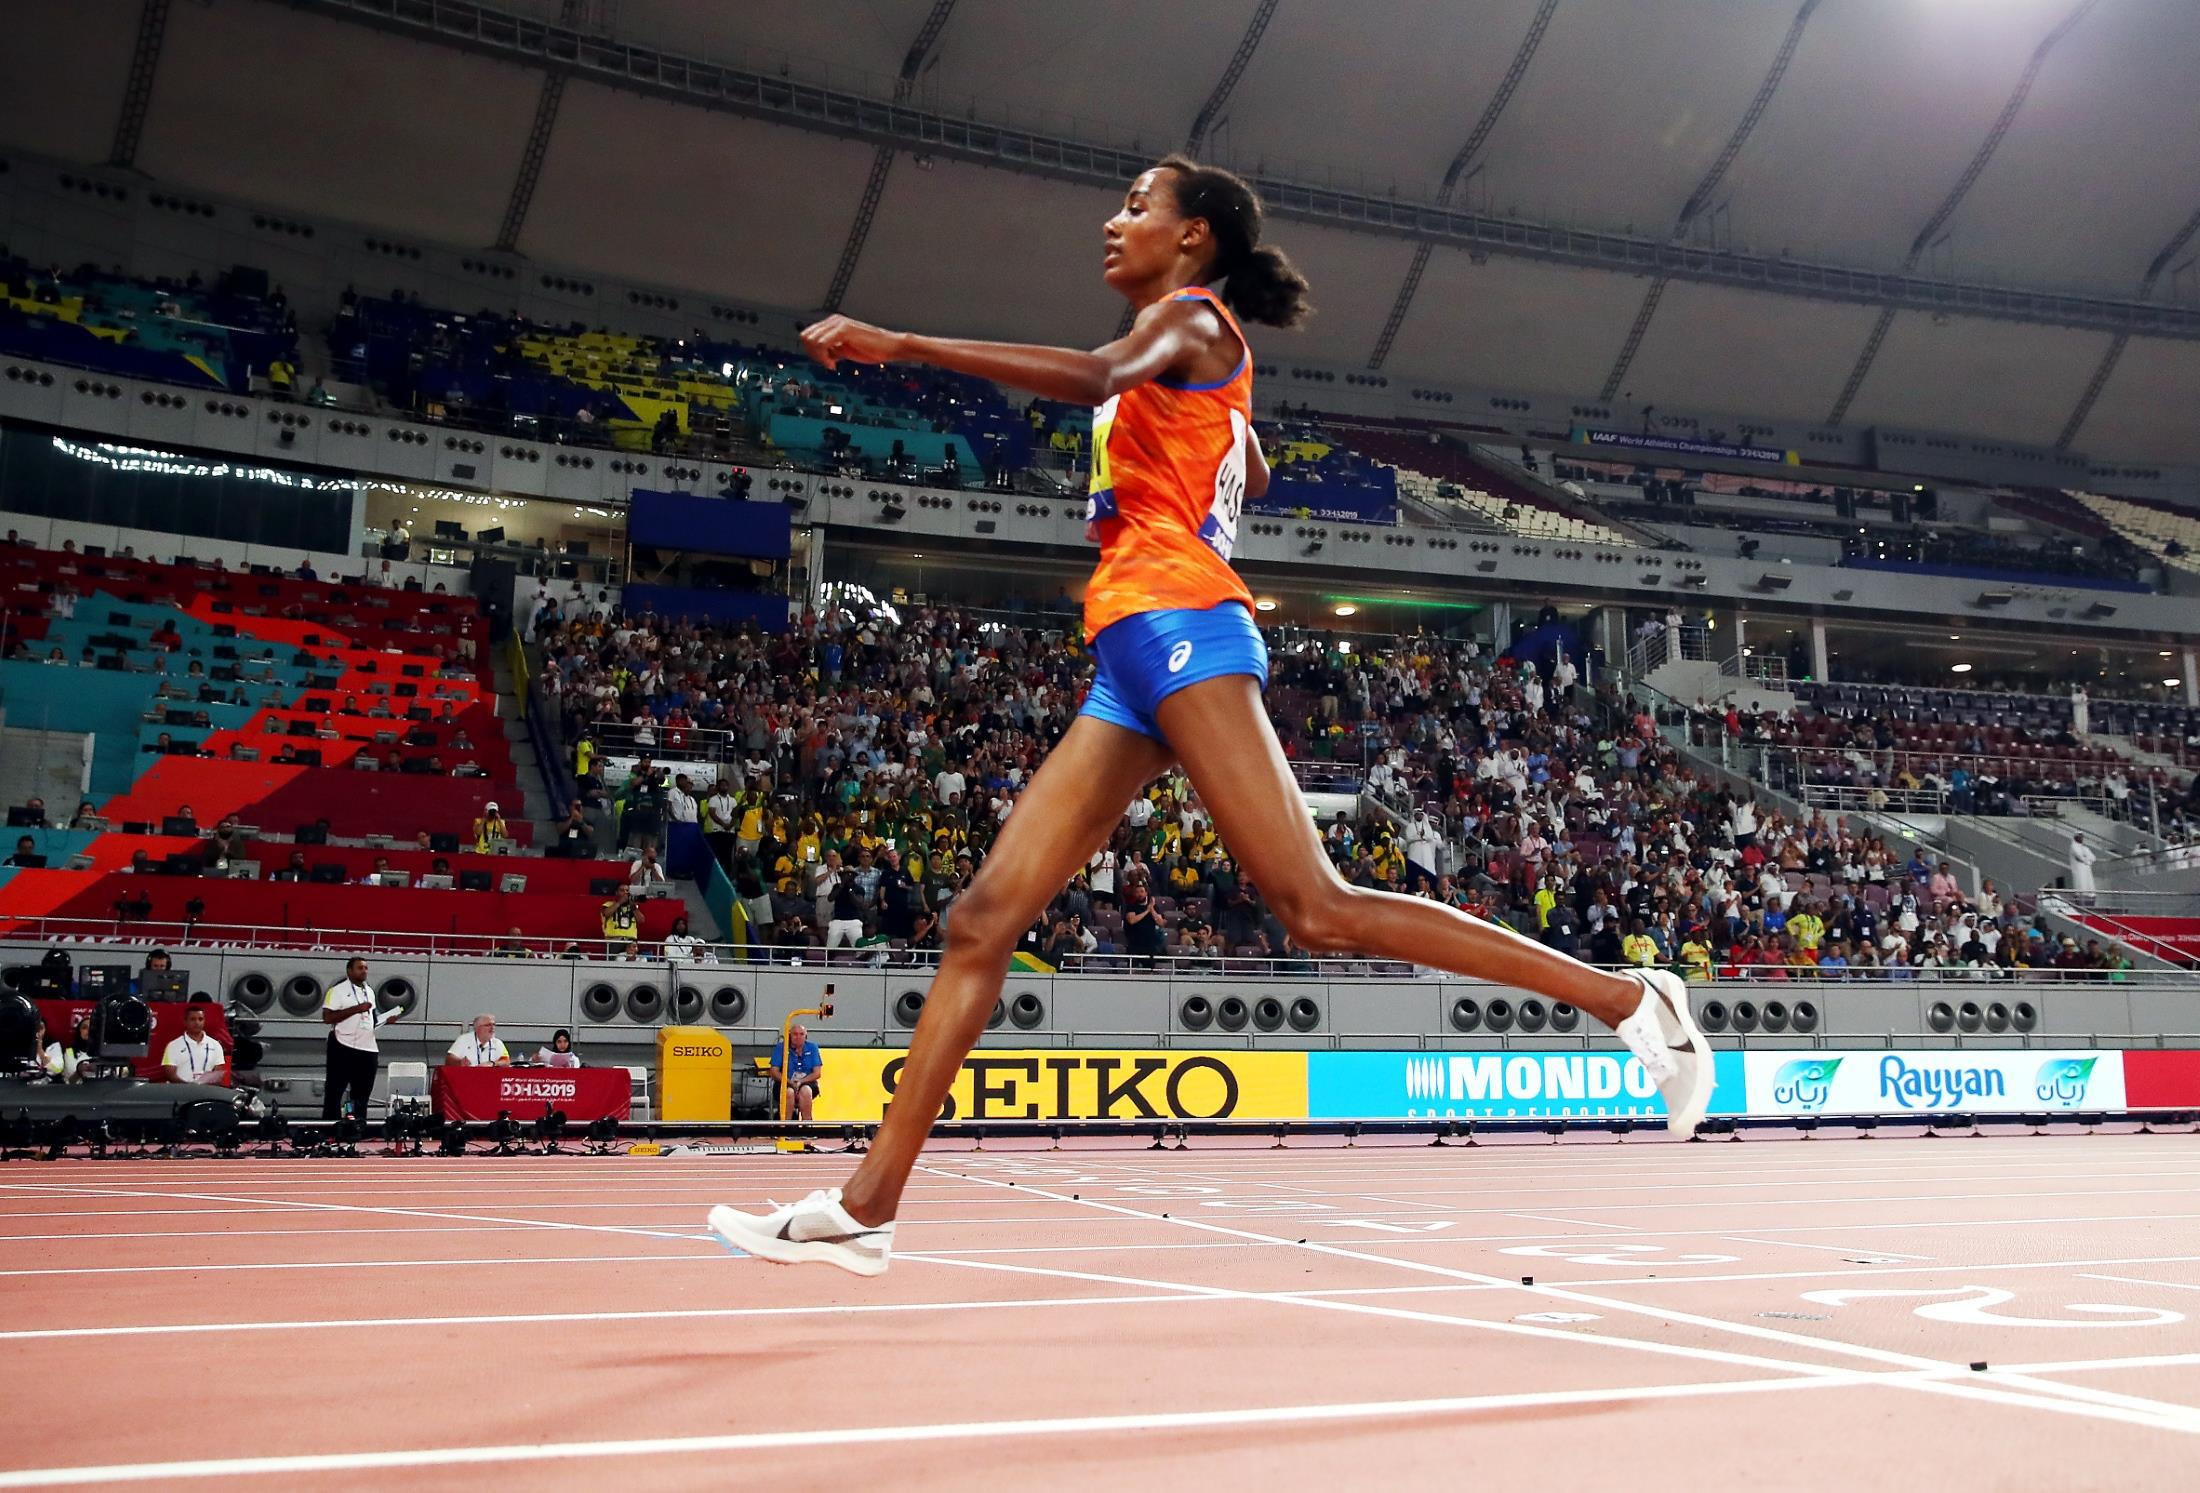 Sifan Hassan wins the 10,000m at the IAAF World Athletics Championships Doha 2019 (Getty Images)